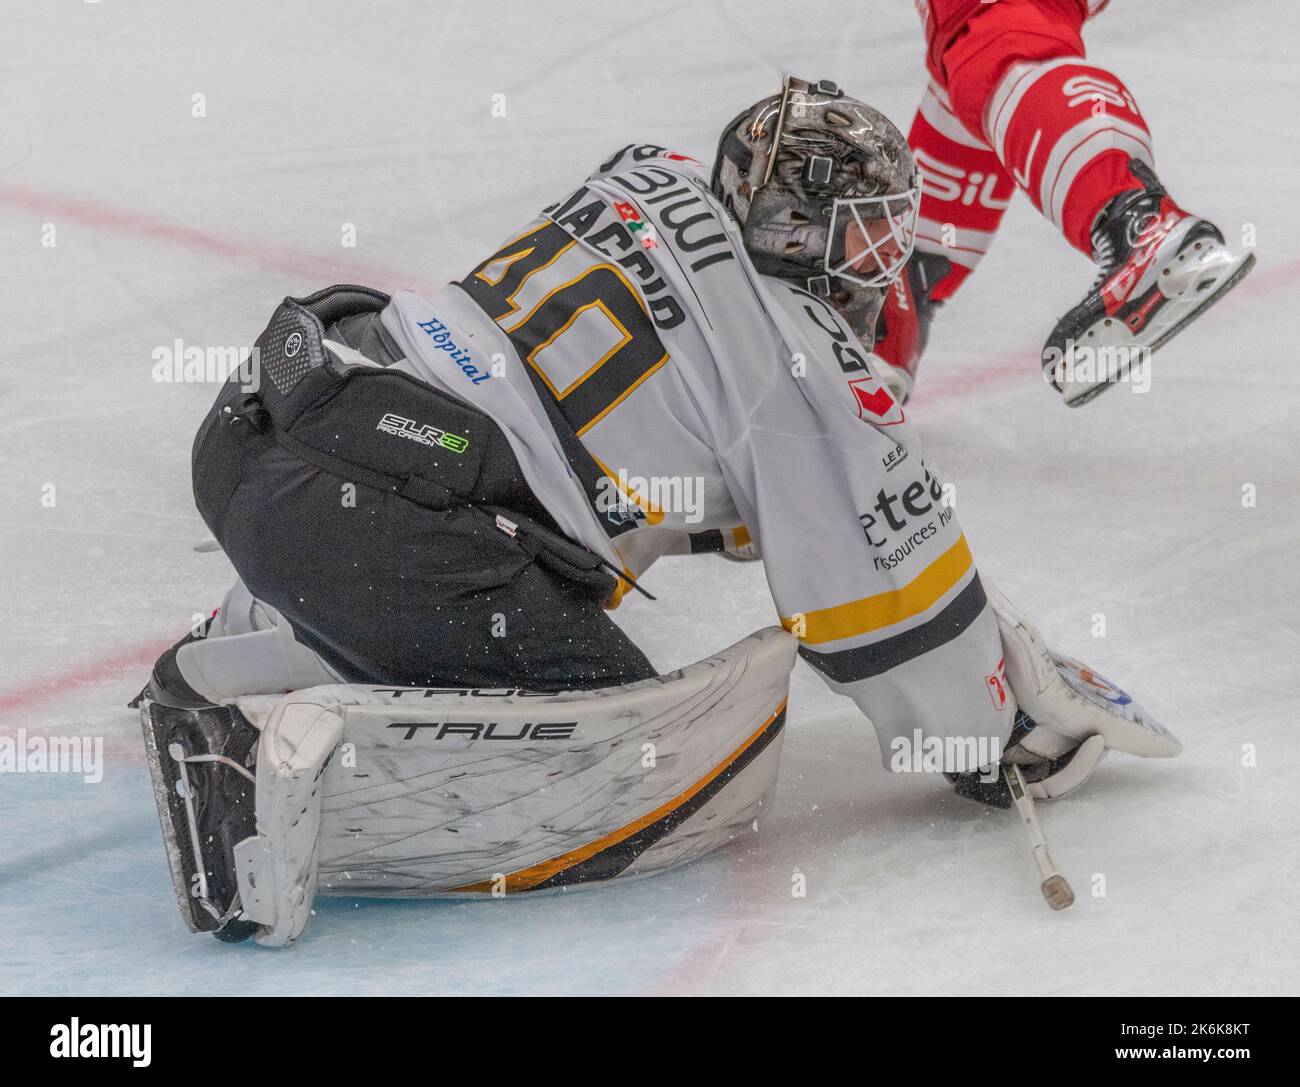 Lausanne Switzerland, 10/14/2022: Damino Class (goalie) of HC Ajoie (40) makes a stop during 11th day of the 2022-2023 Swiss National League Season of the 2022-2023 Swiss National League Season with the Lausanne HC and HC Ajoie. The match took place at the Vaudoise Arena in Lausanne. Credit: Eric Dubost/Alamy Live News Stock Photo